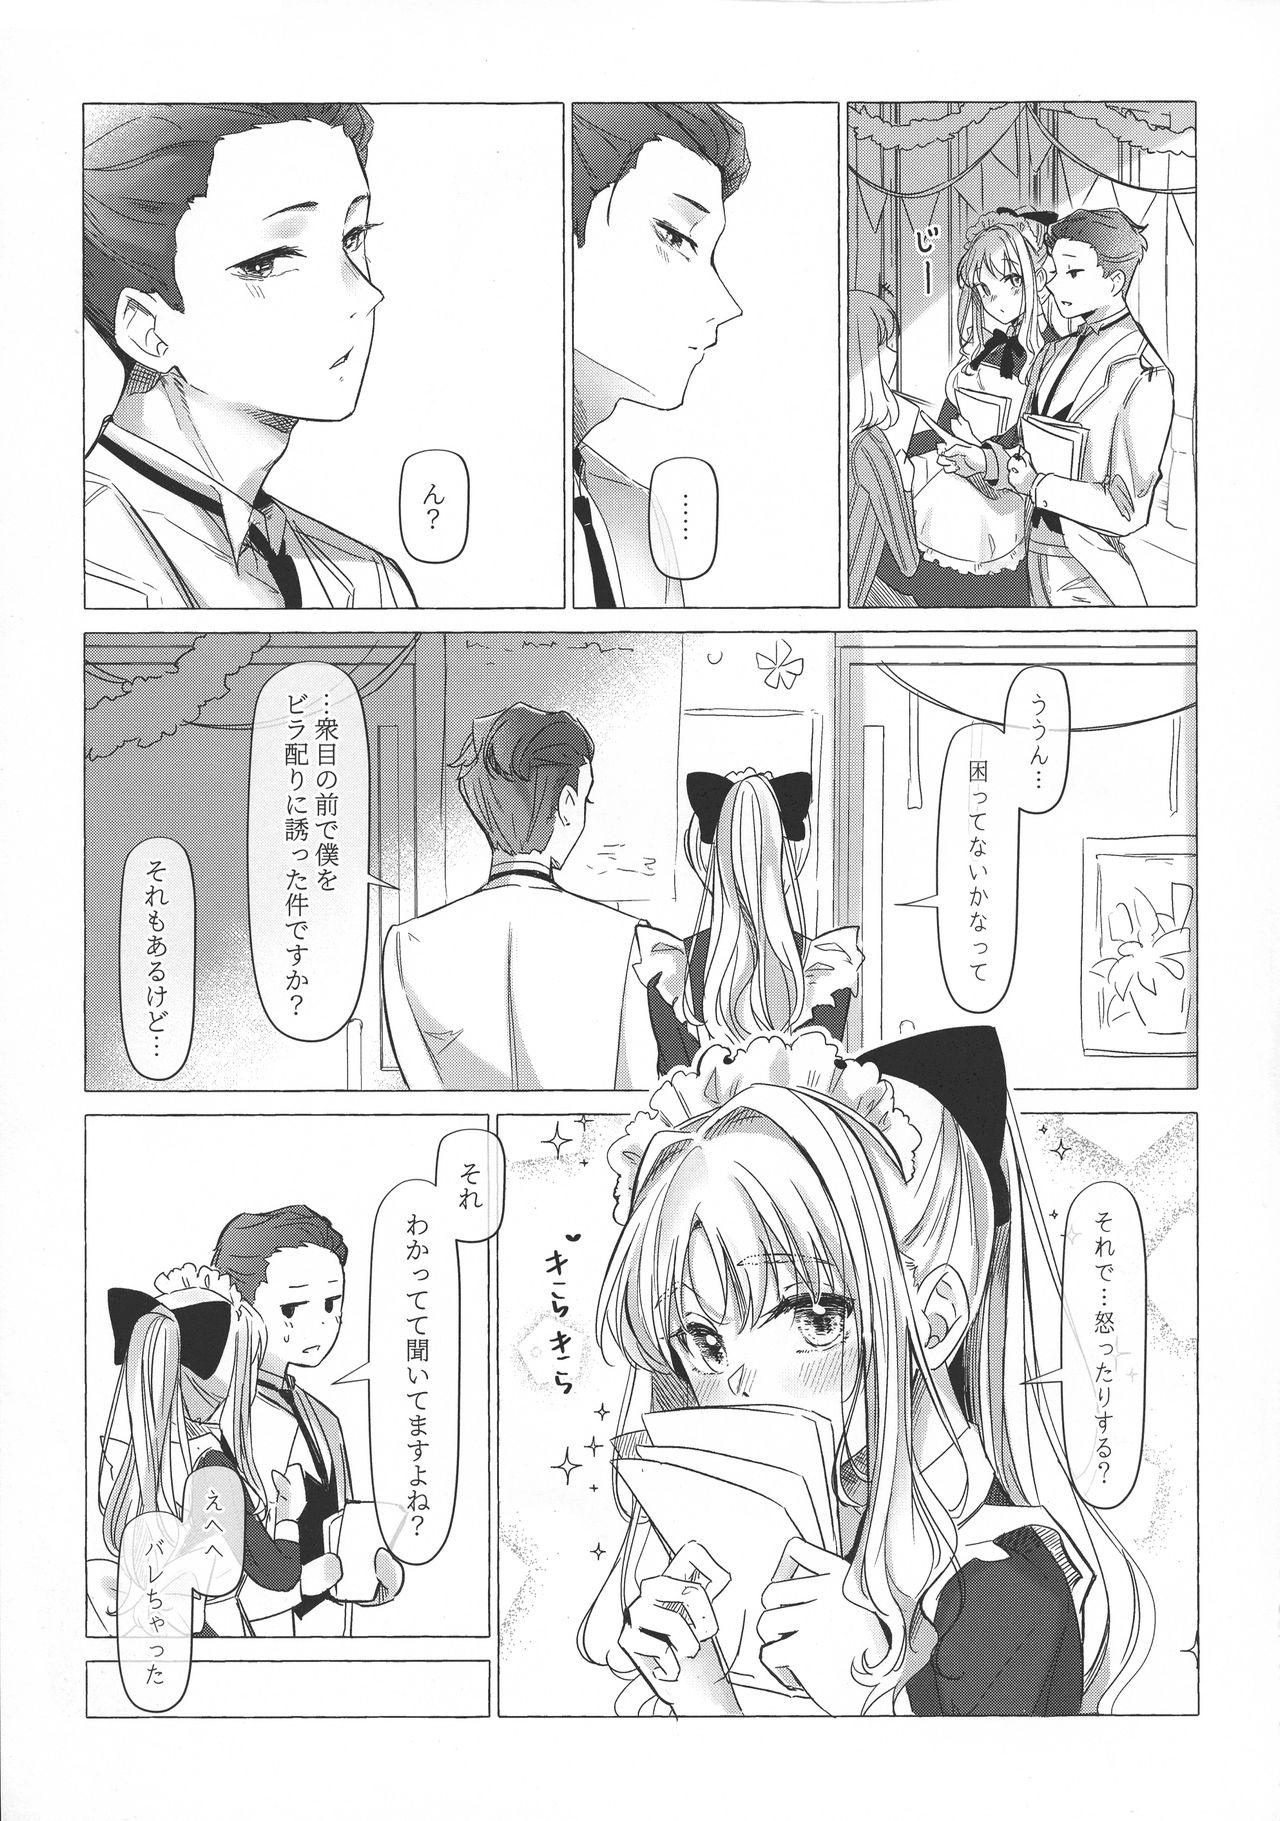 Piroca 満心総意の躾 - Darling in the franxx Hard Cock - Page 6